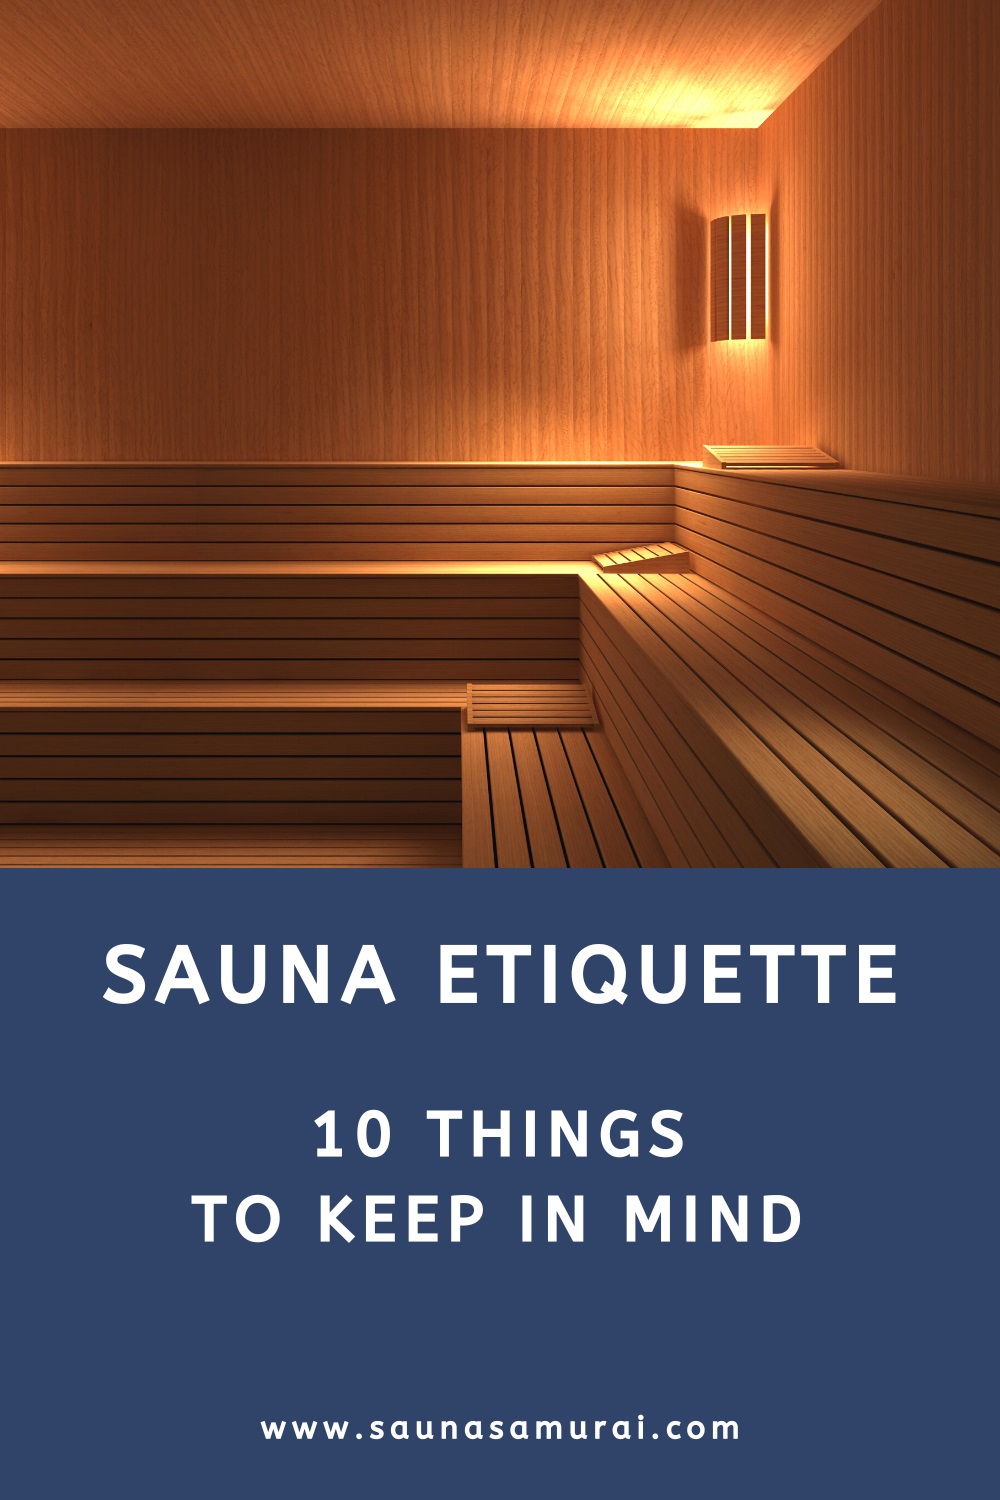 Sauna etiquette guide (10 things to keep in mind)